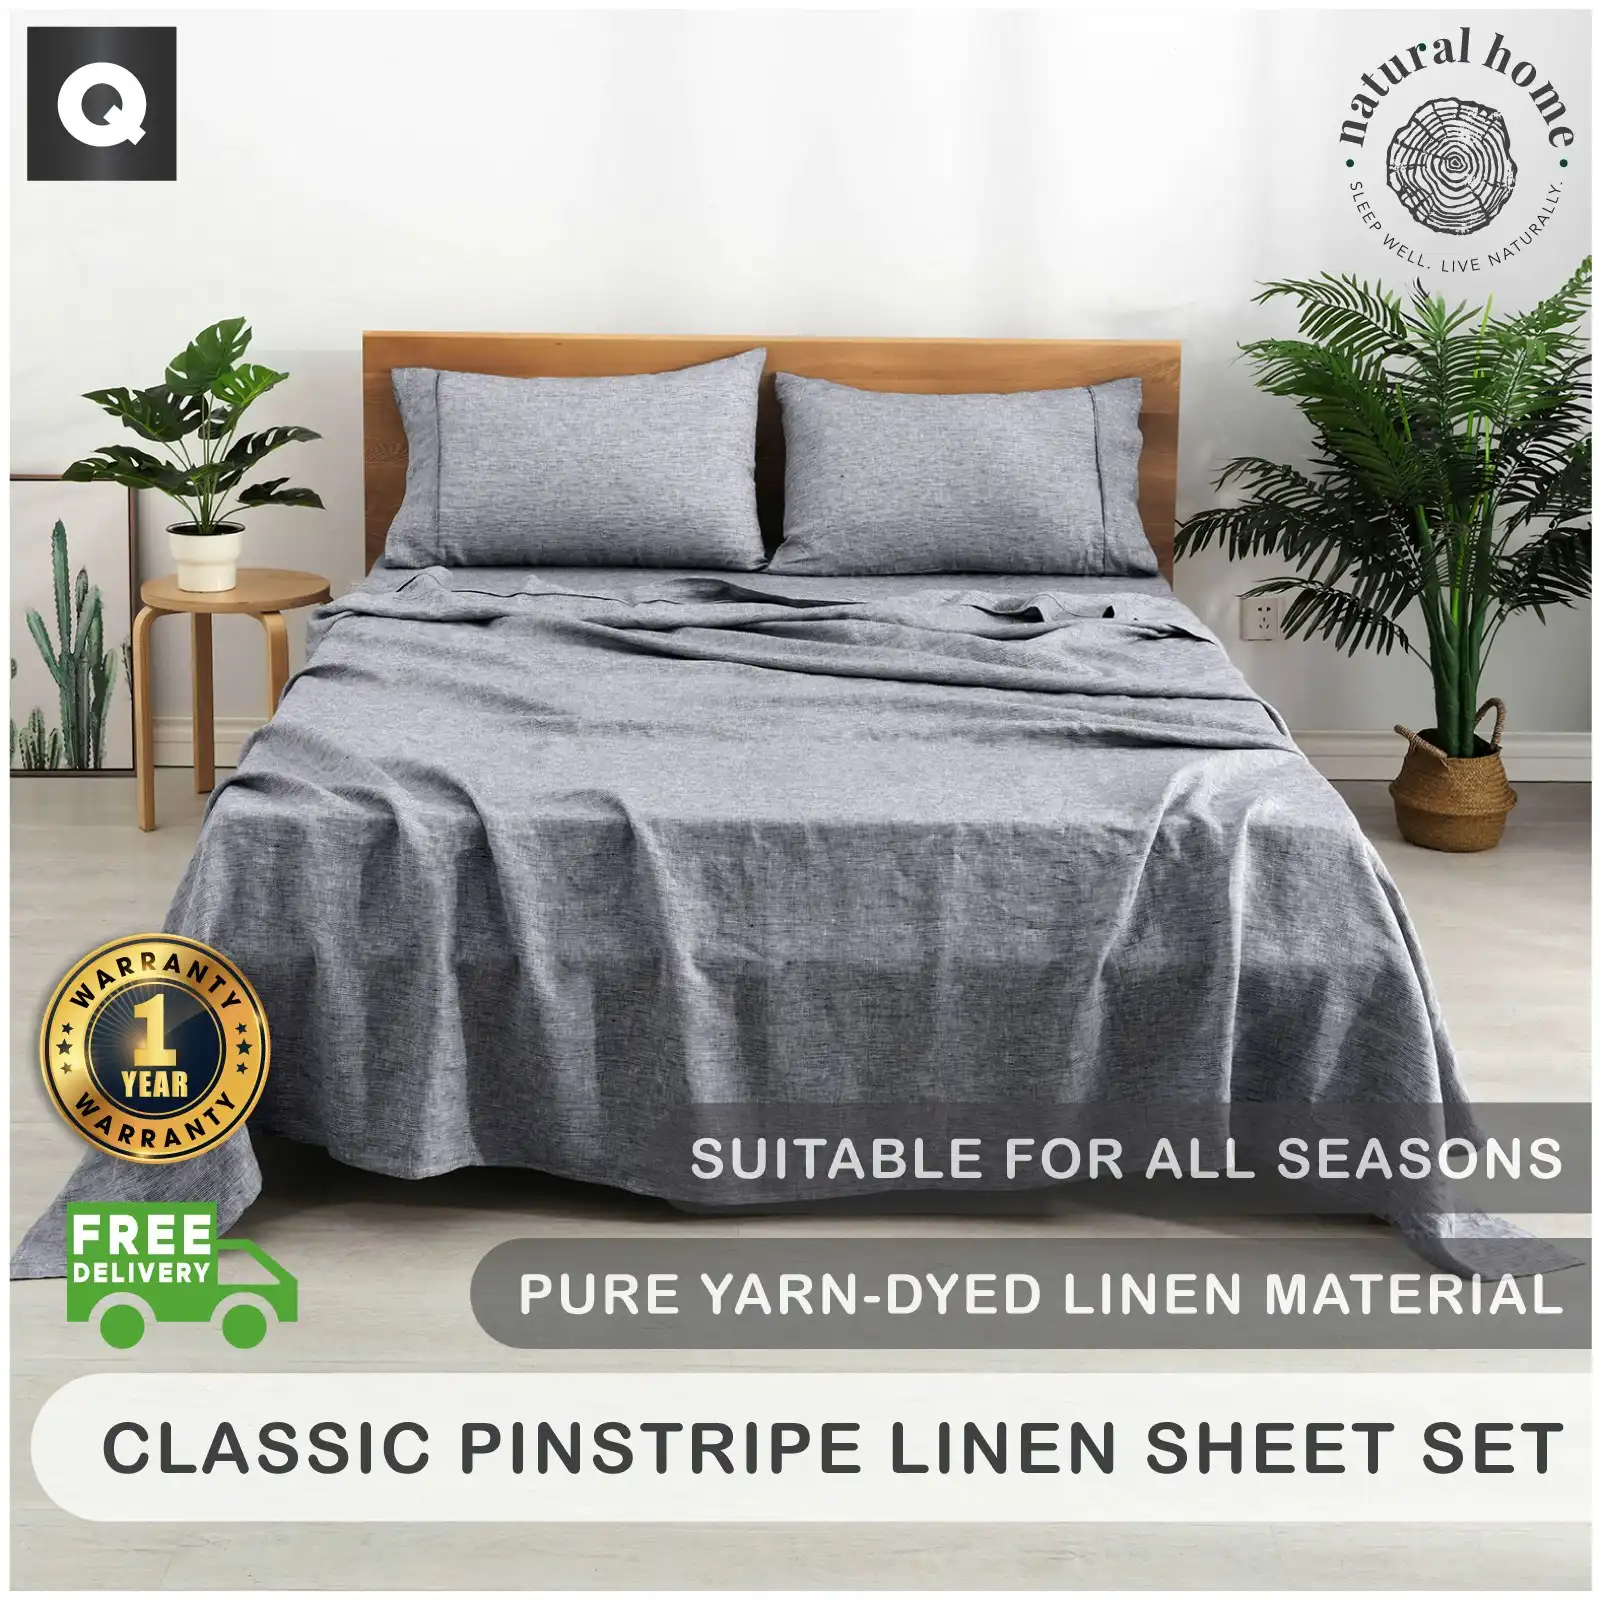 Natural Home Classic Pinstripe Linen Sheet Set Dark with White Pinstripe Queen Bed